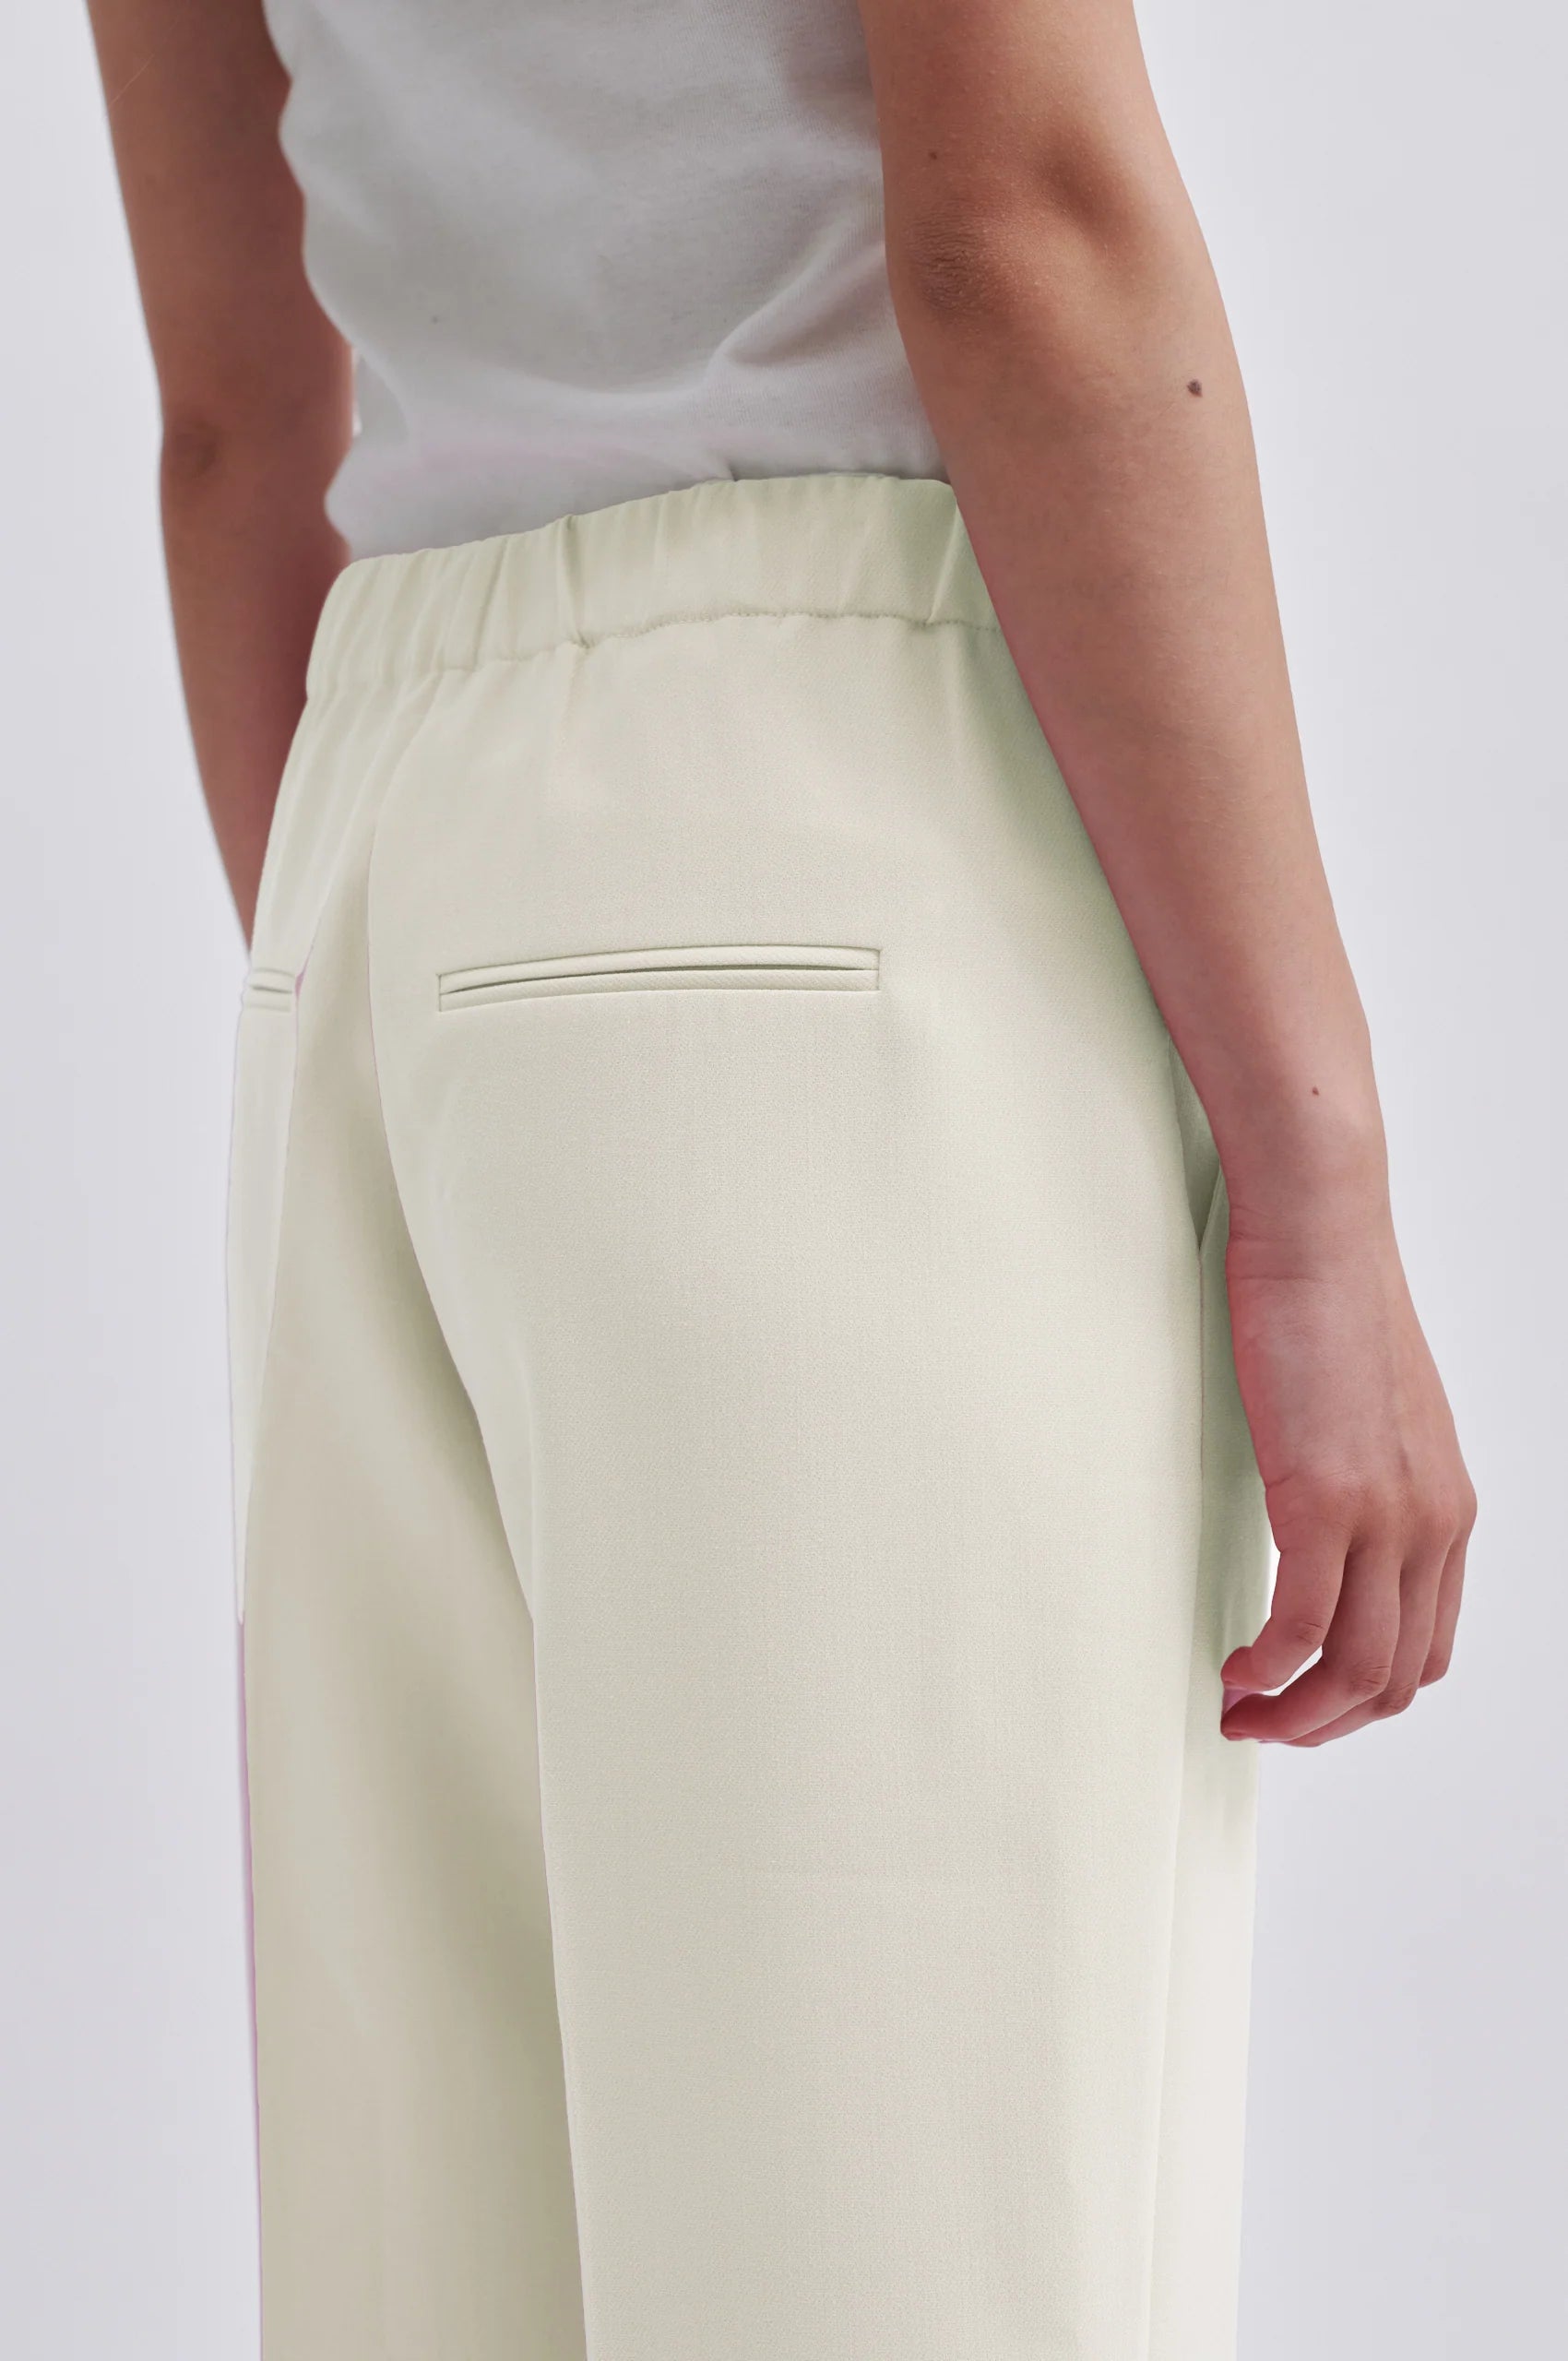 Cream tailored trousers with elasticated waistband at the back side pockets and straight legs